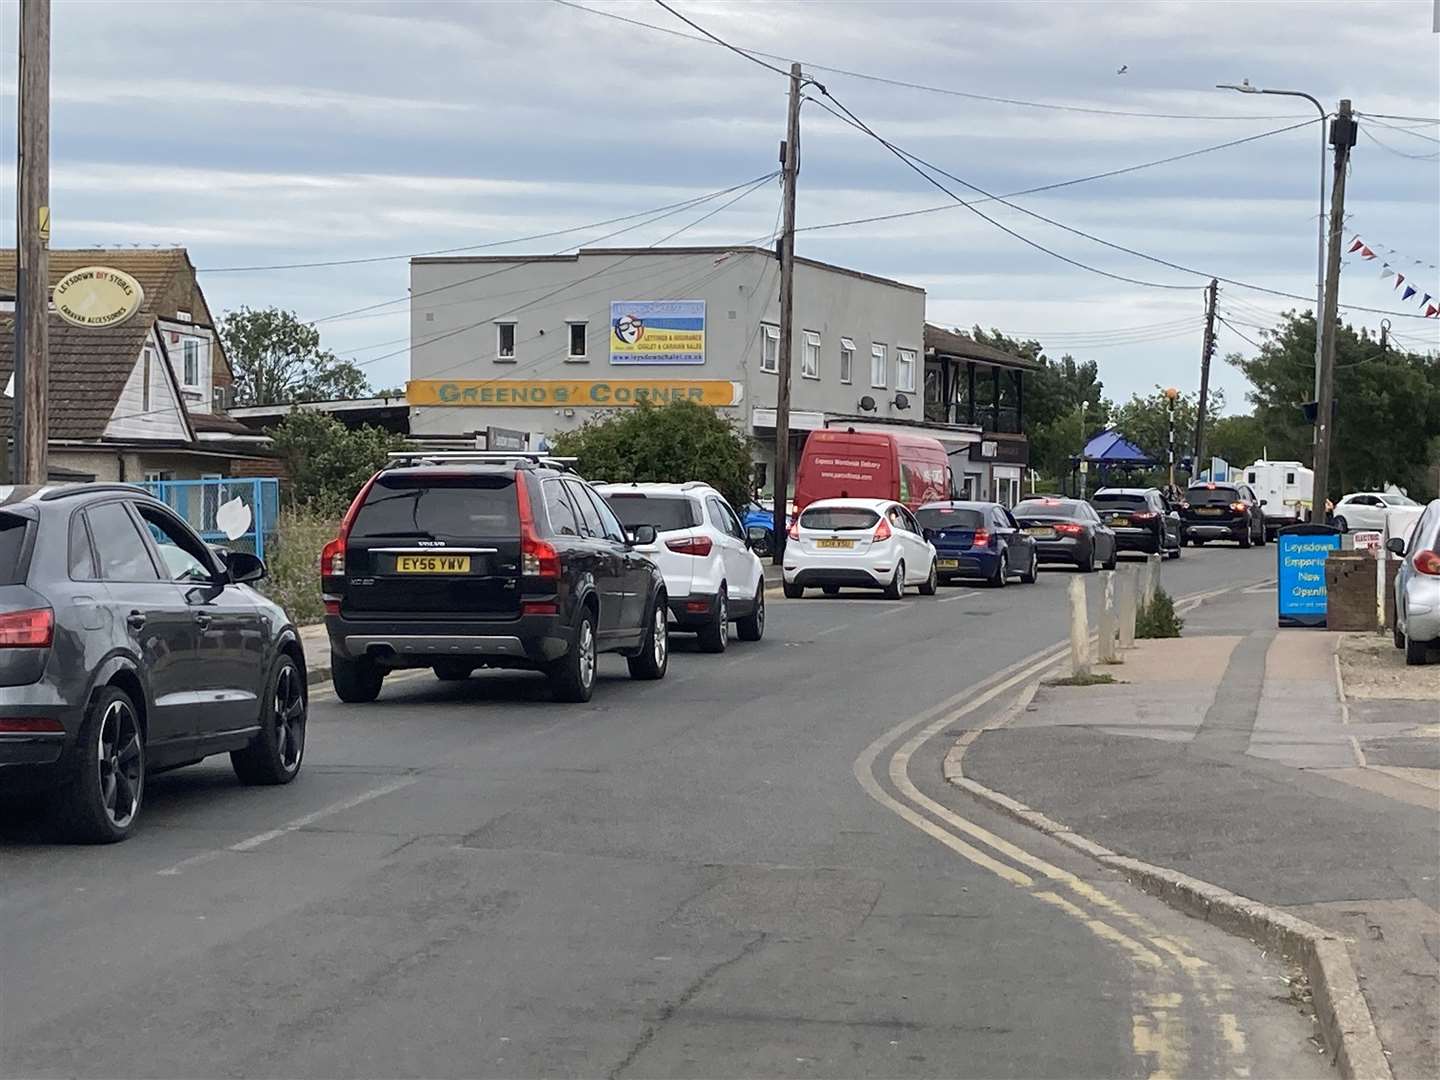 Queues building for free water bottles in an amusement arcade car park at Leysdown when Sheppey lost its supply in July 2022